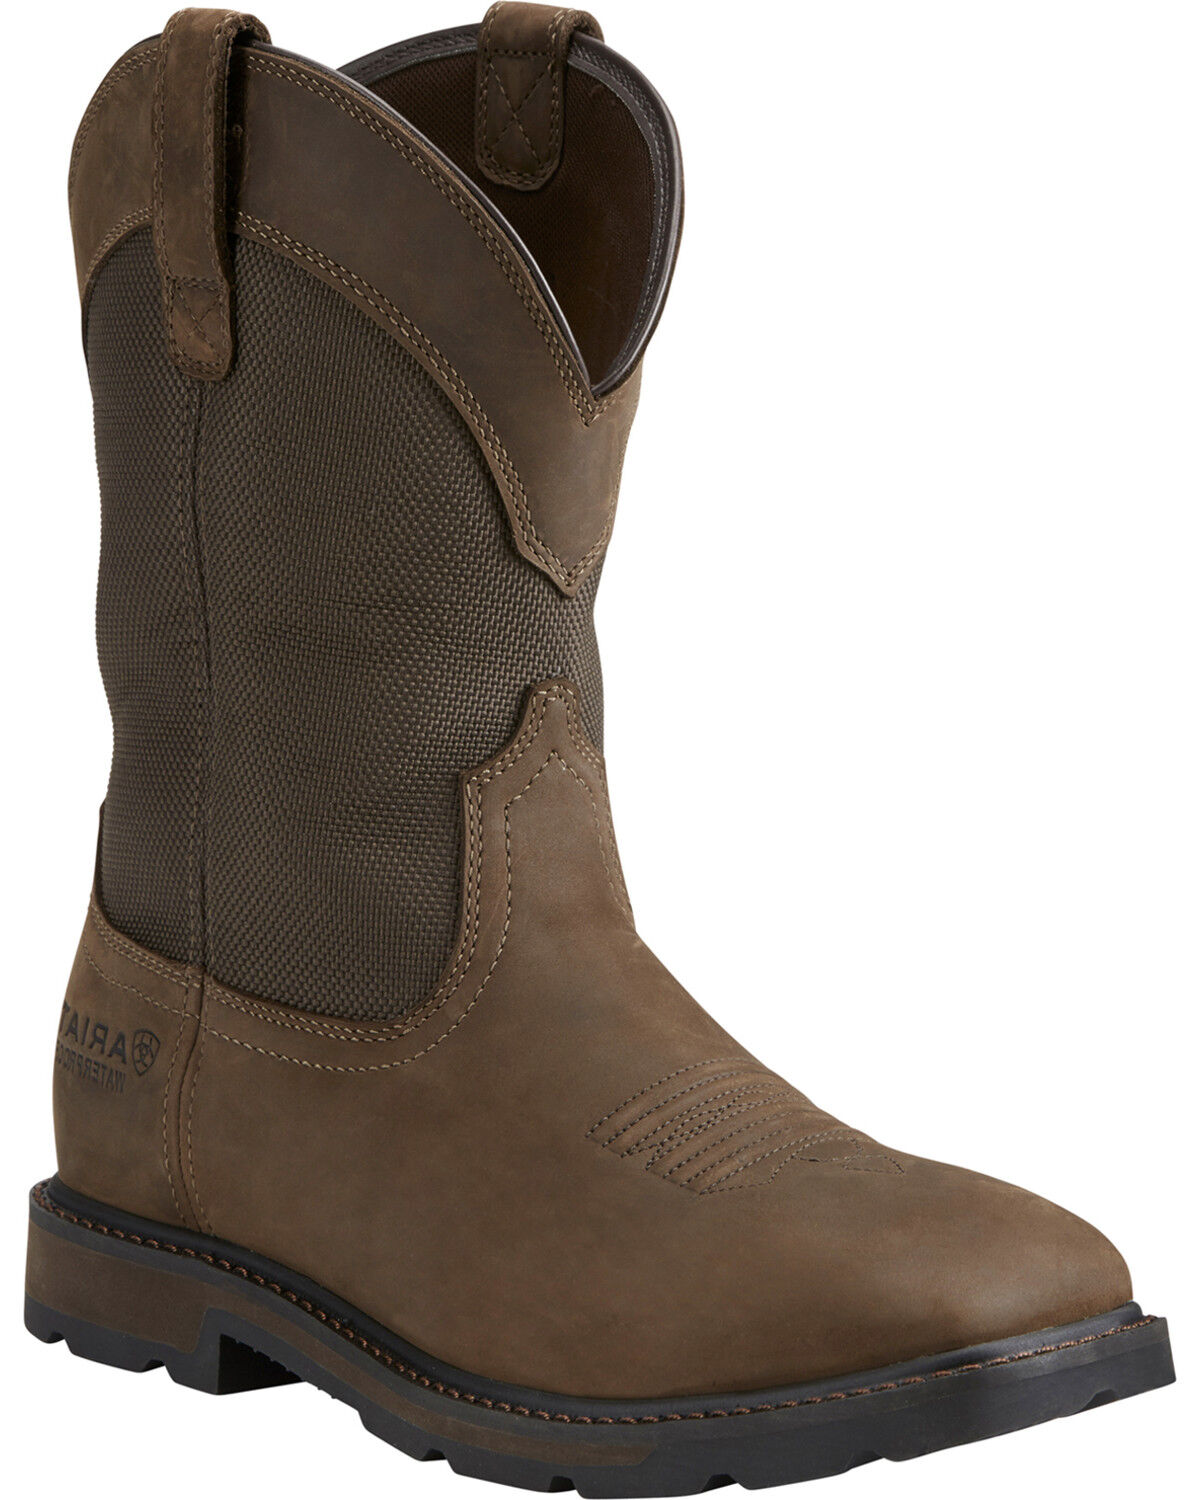 cheapest place to buy ariat boots